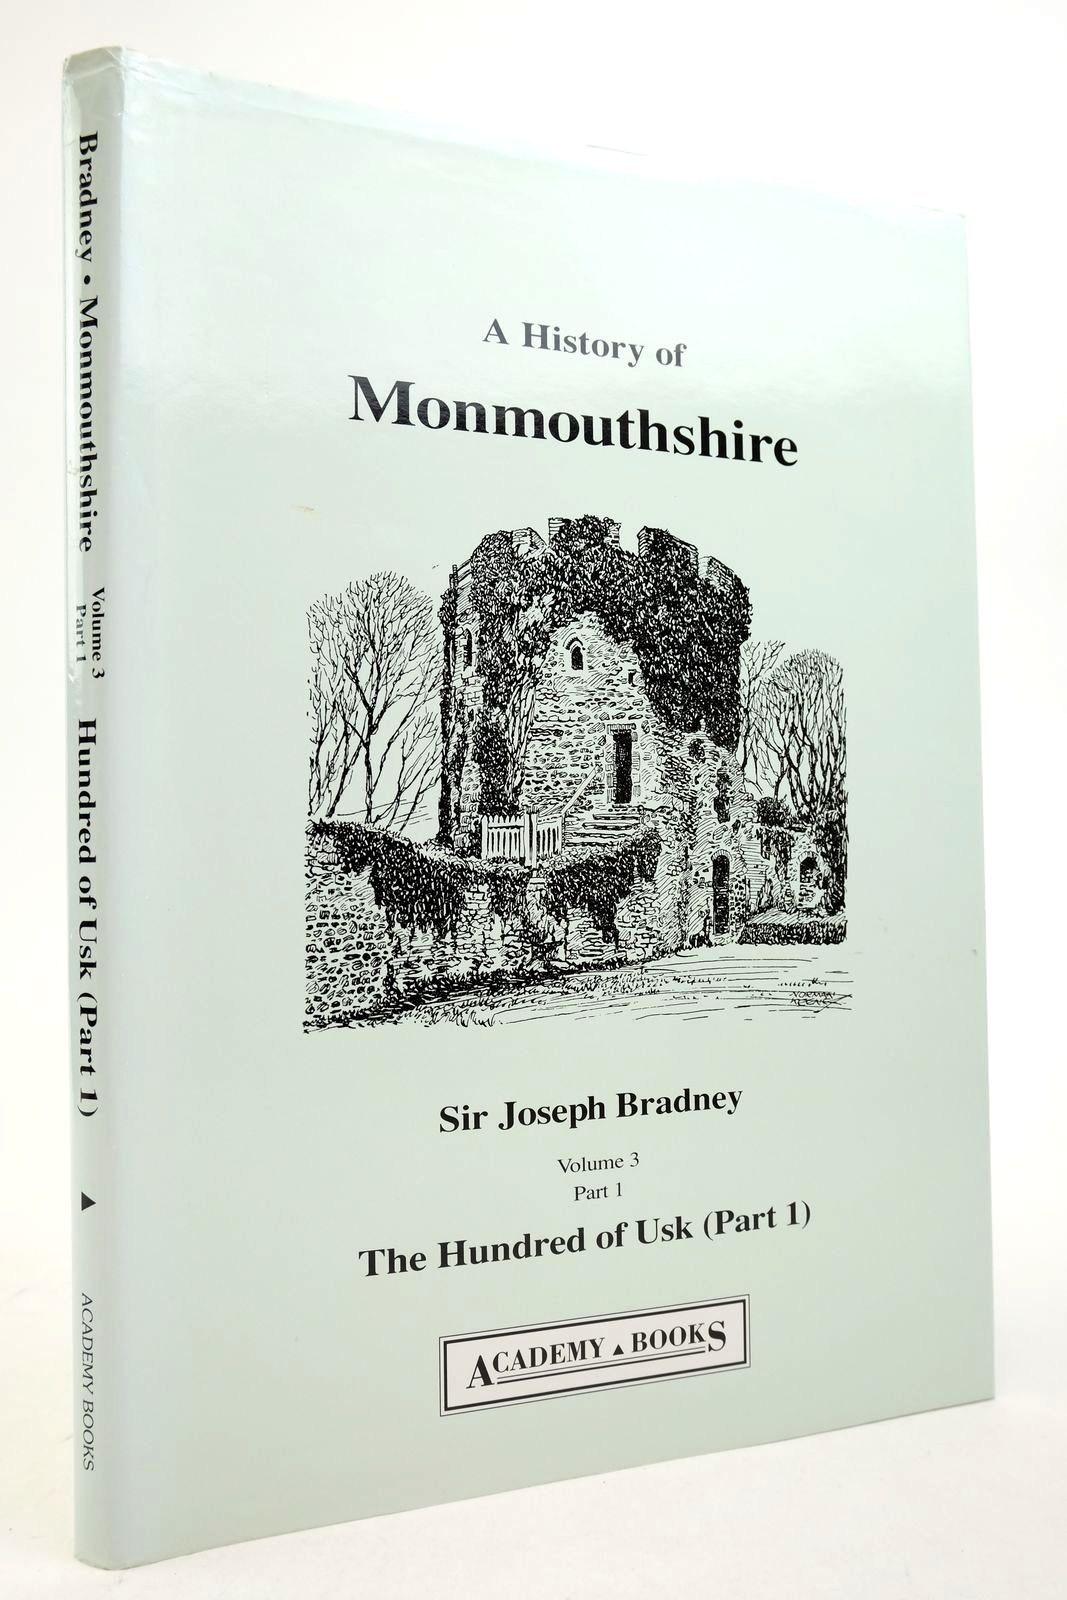 Photo of A HISTORY OF MONMOUTHSHIRE THE HUNDRED OF USK (PART 1) written by Bradney, Joseph published by Academy Books (STOCK CODE: 2140568)  for sale by Stella & Rose's Books